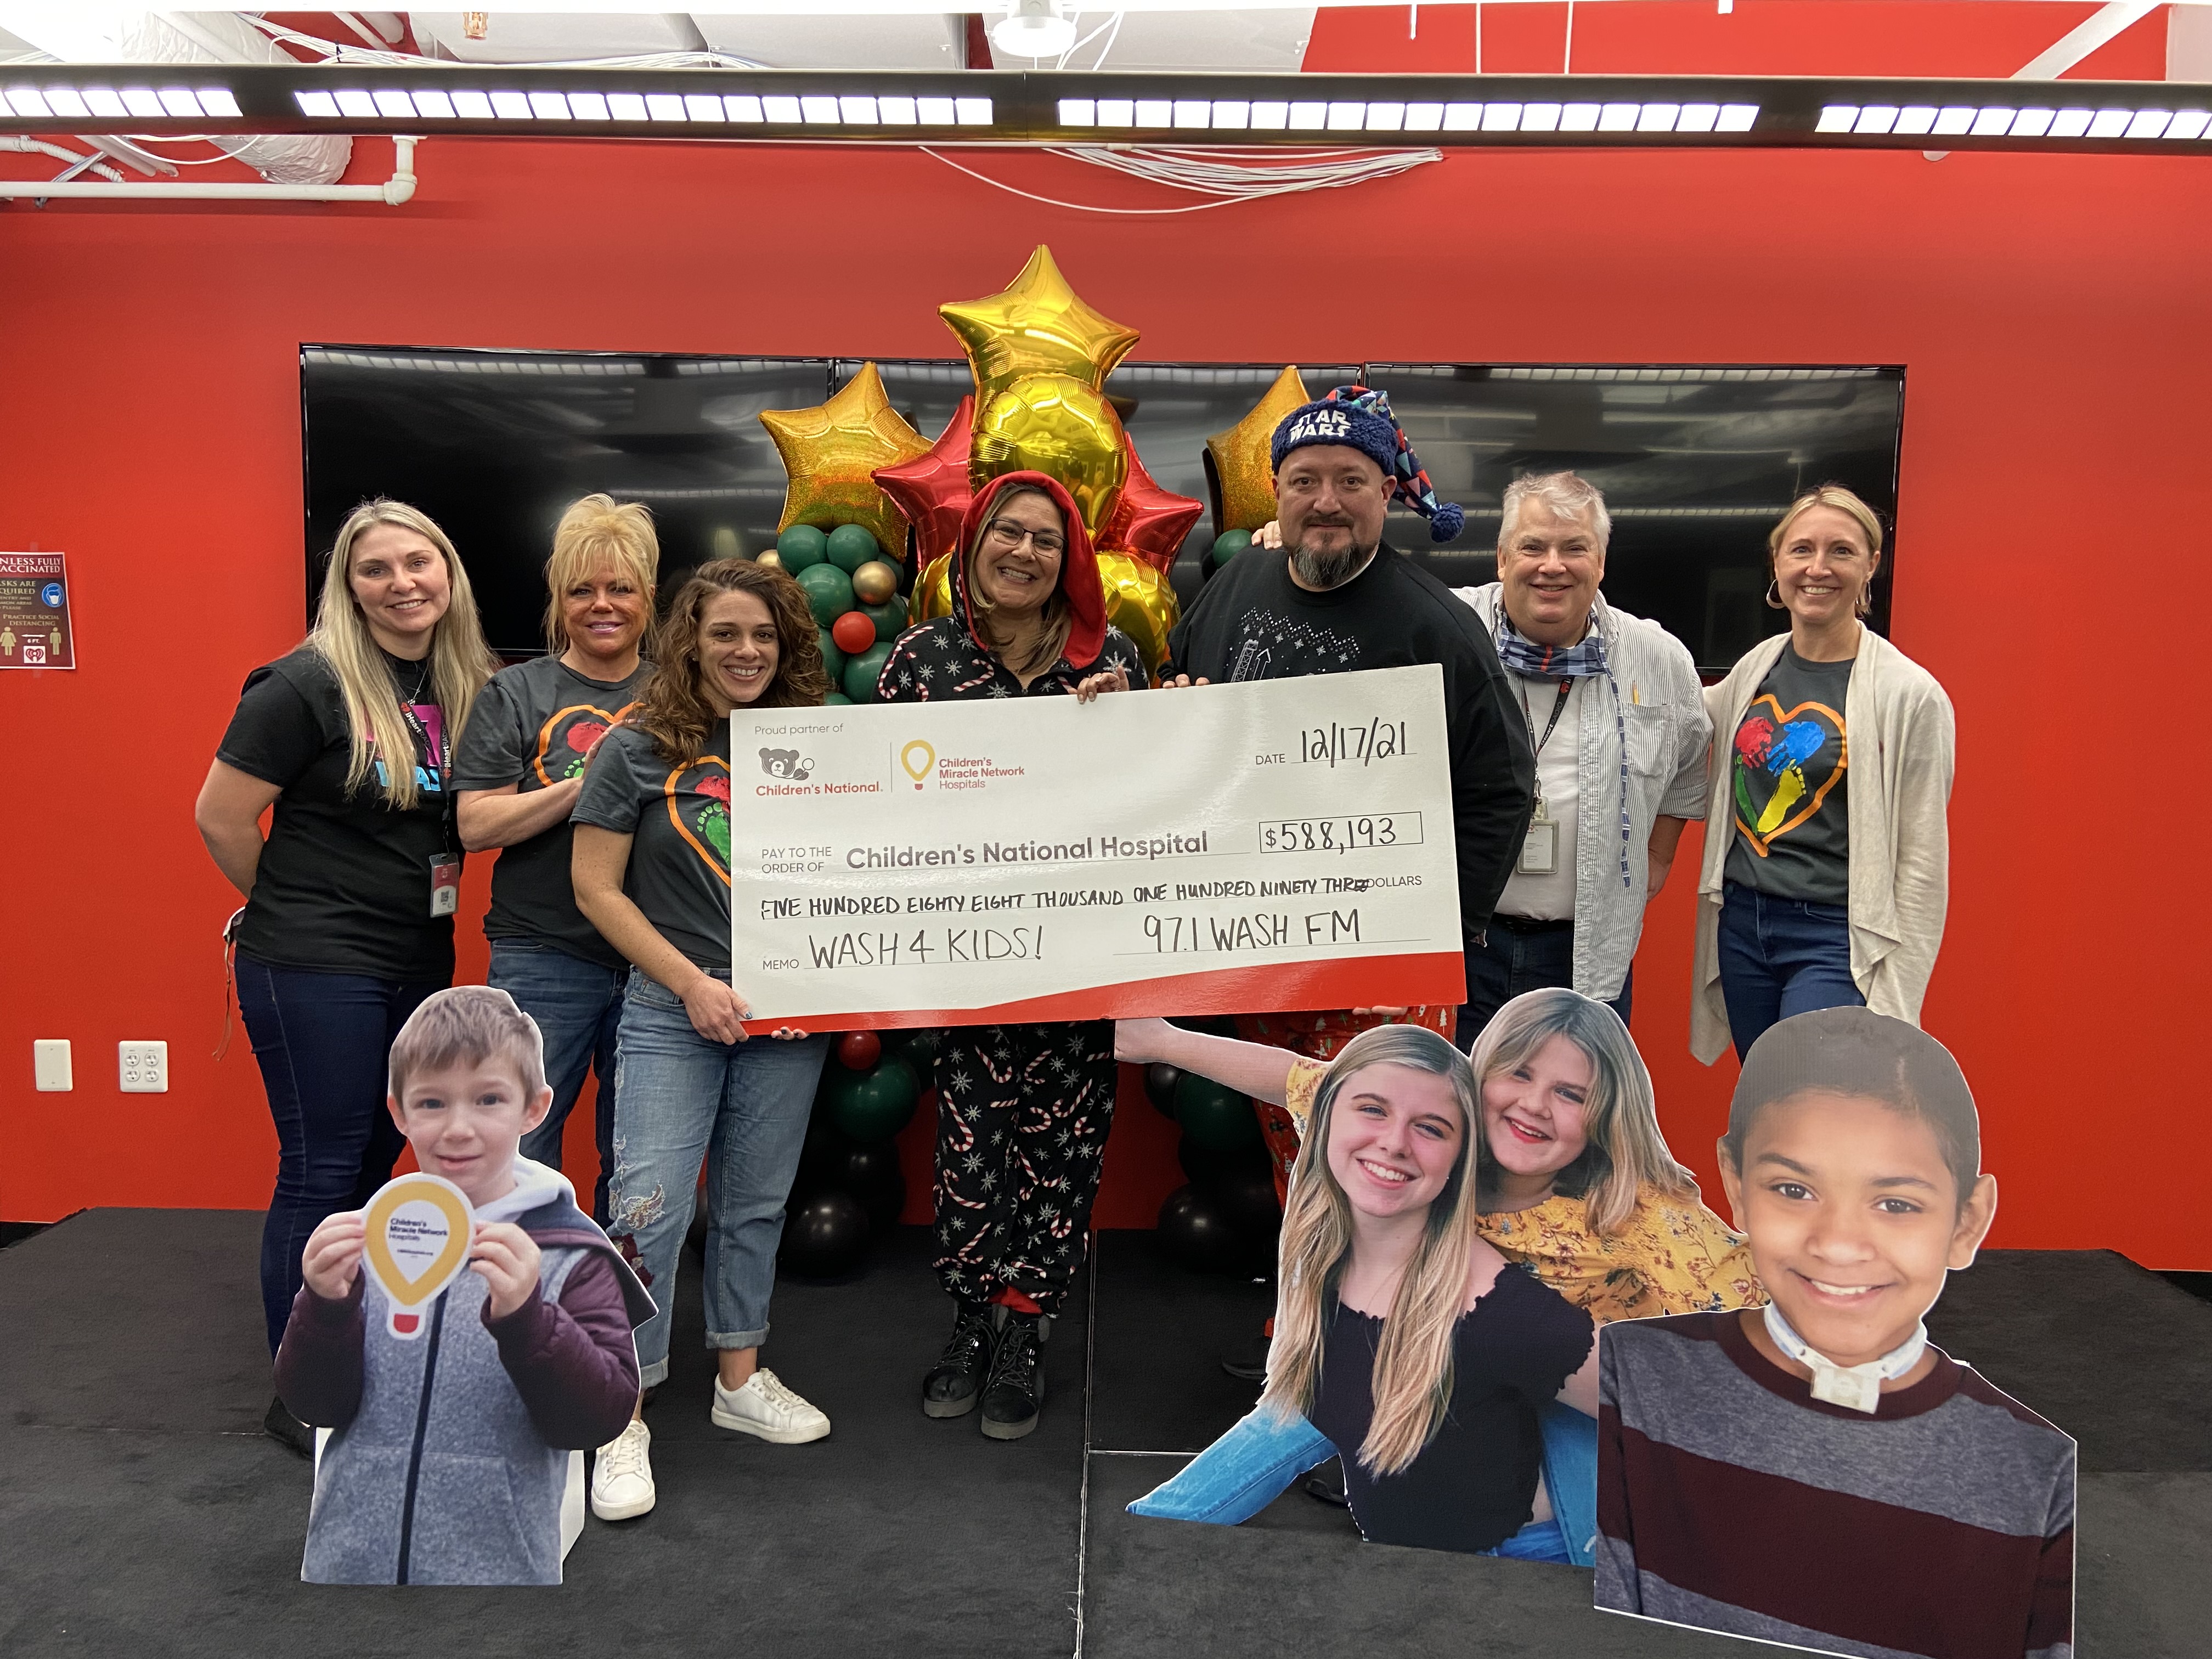 WASH FM donates nearly $600,000 to Children's National Hospital for it's annual holiday radiothon